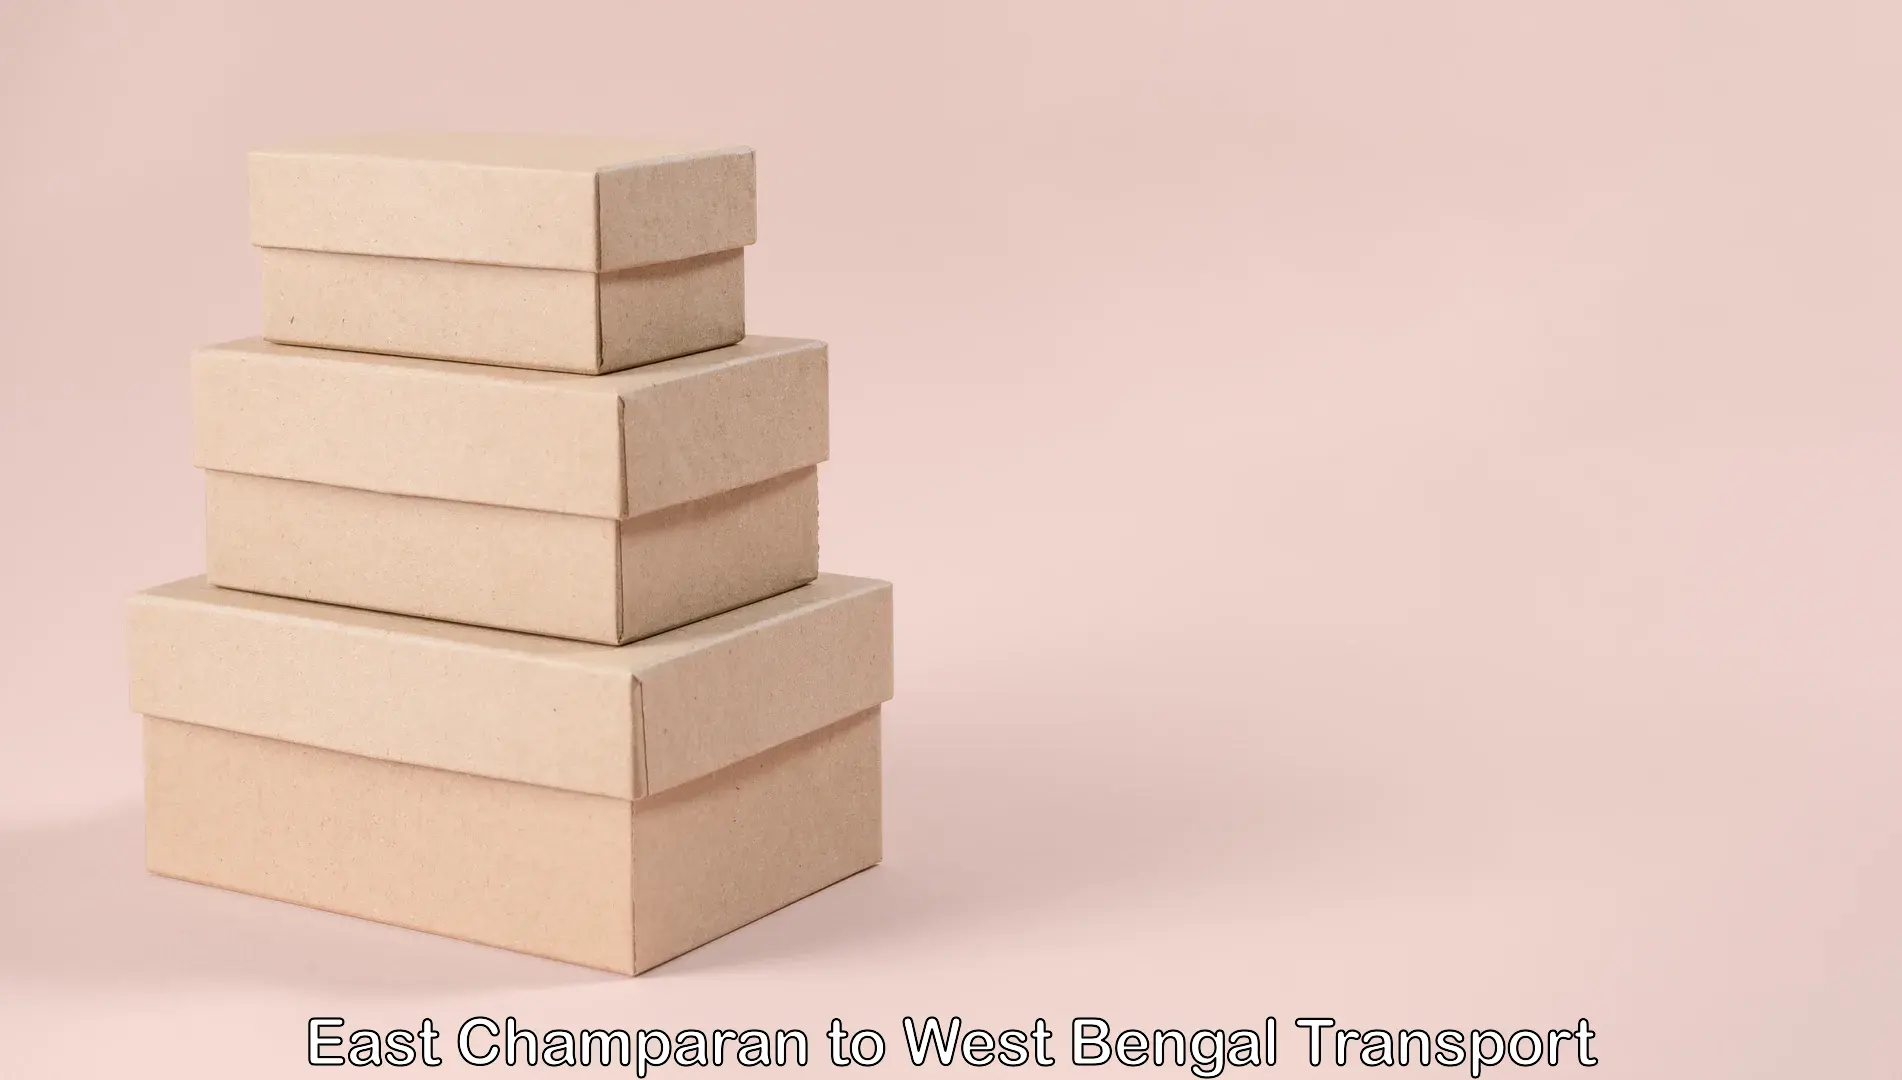 Shipping partner East Champaran to West Bengal